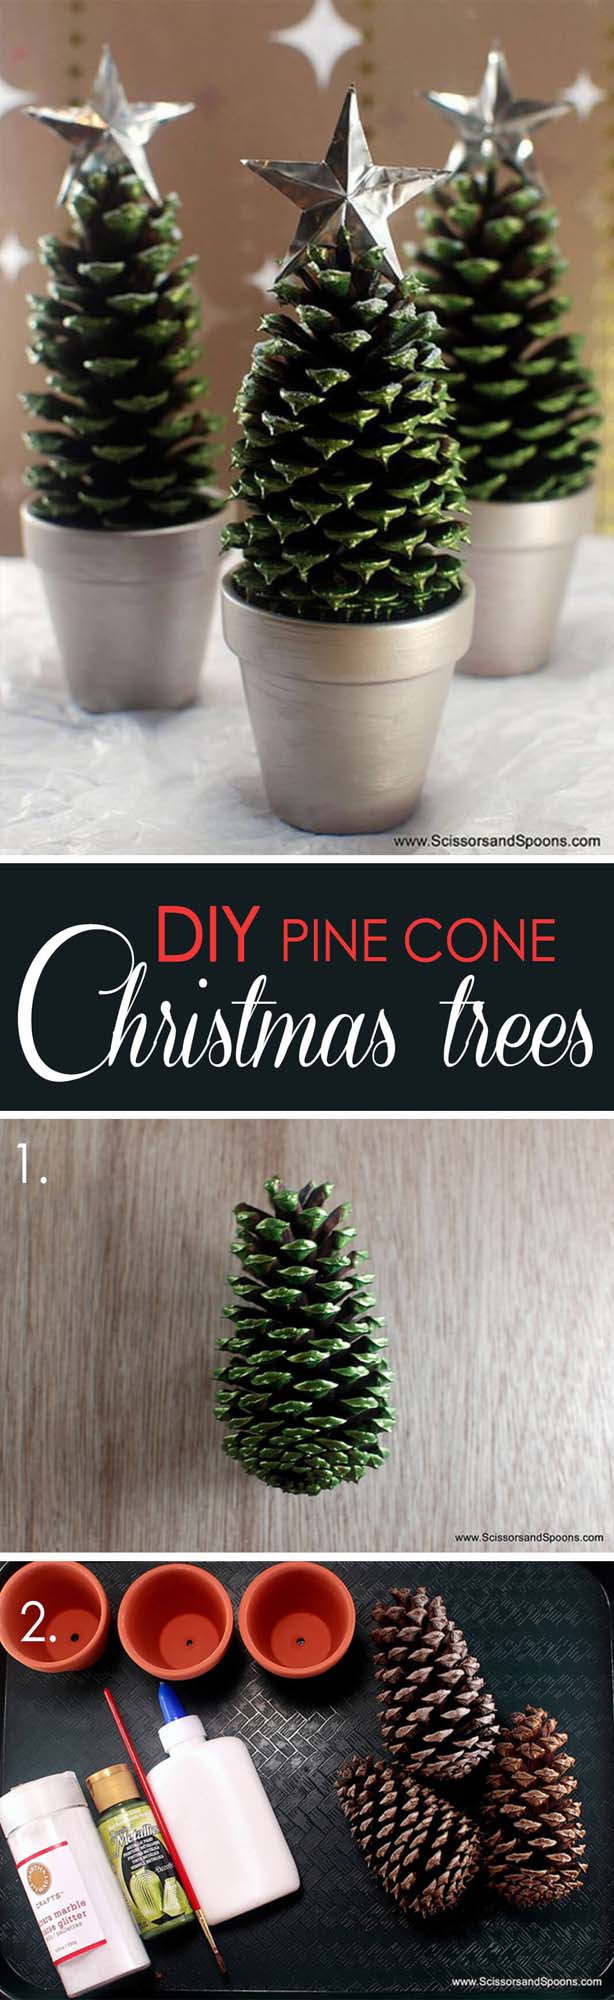 DIY Pine Cone Christmas Trees With Star Tops